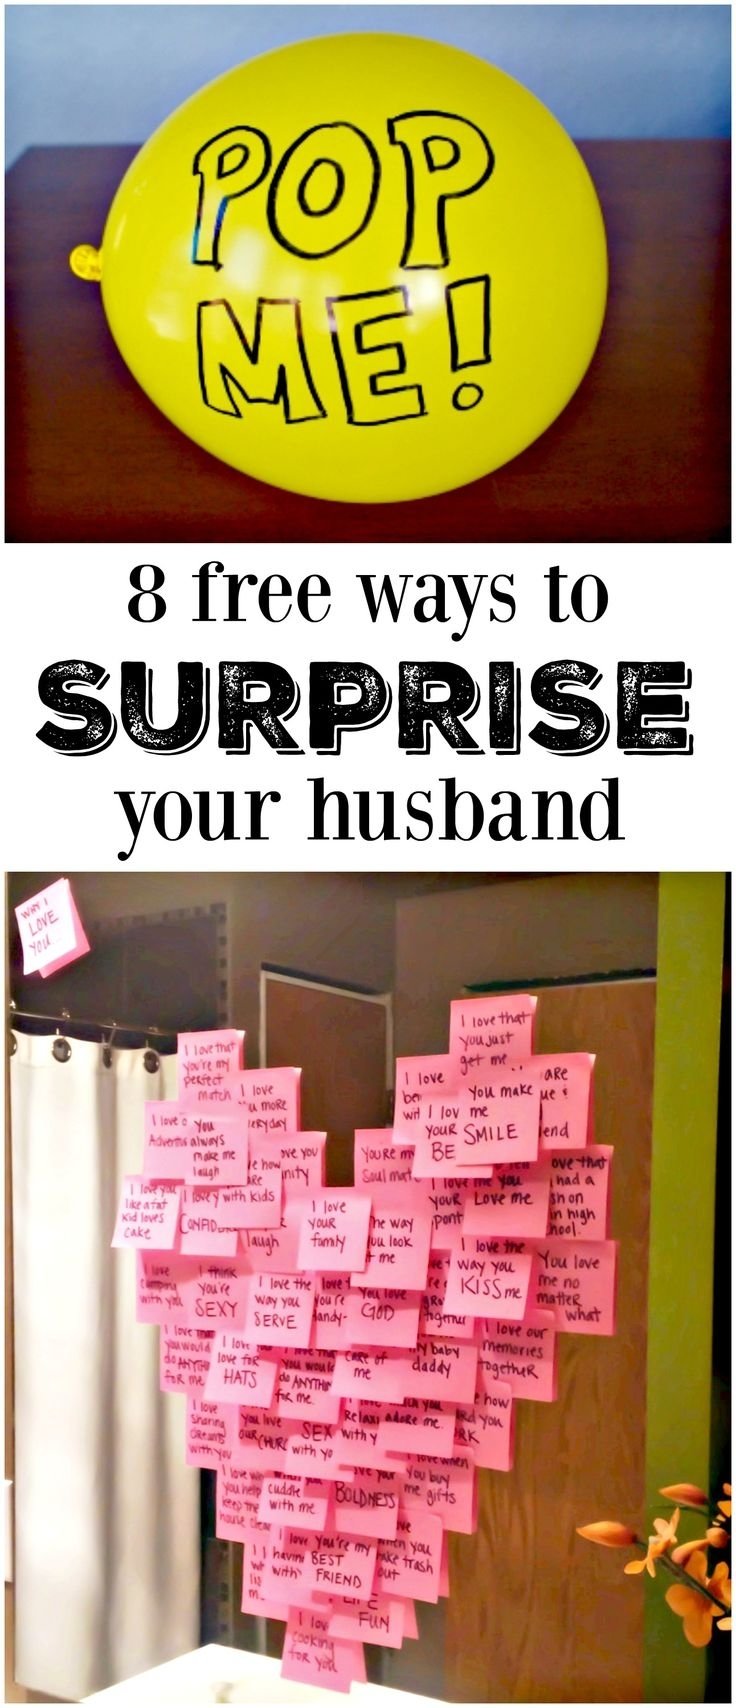 10 Lovable Inexpensive Valentines Day Ideas For Him 52 best valentines day ideas images on pinterest valentines 9 2022